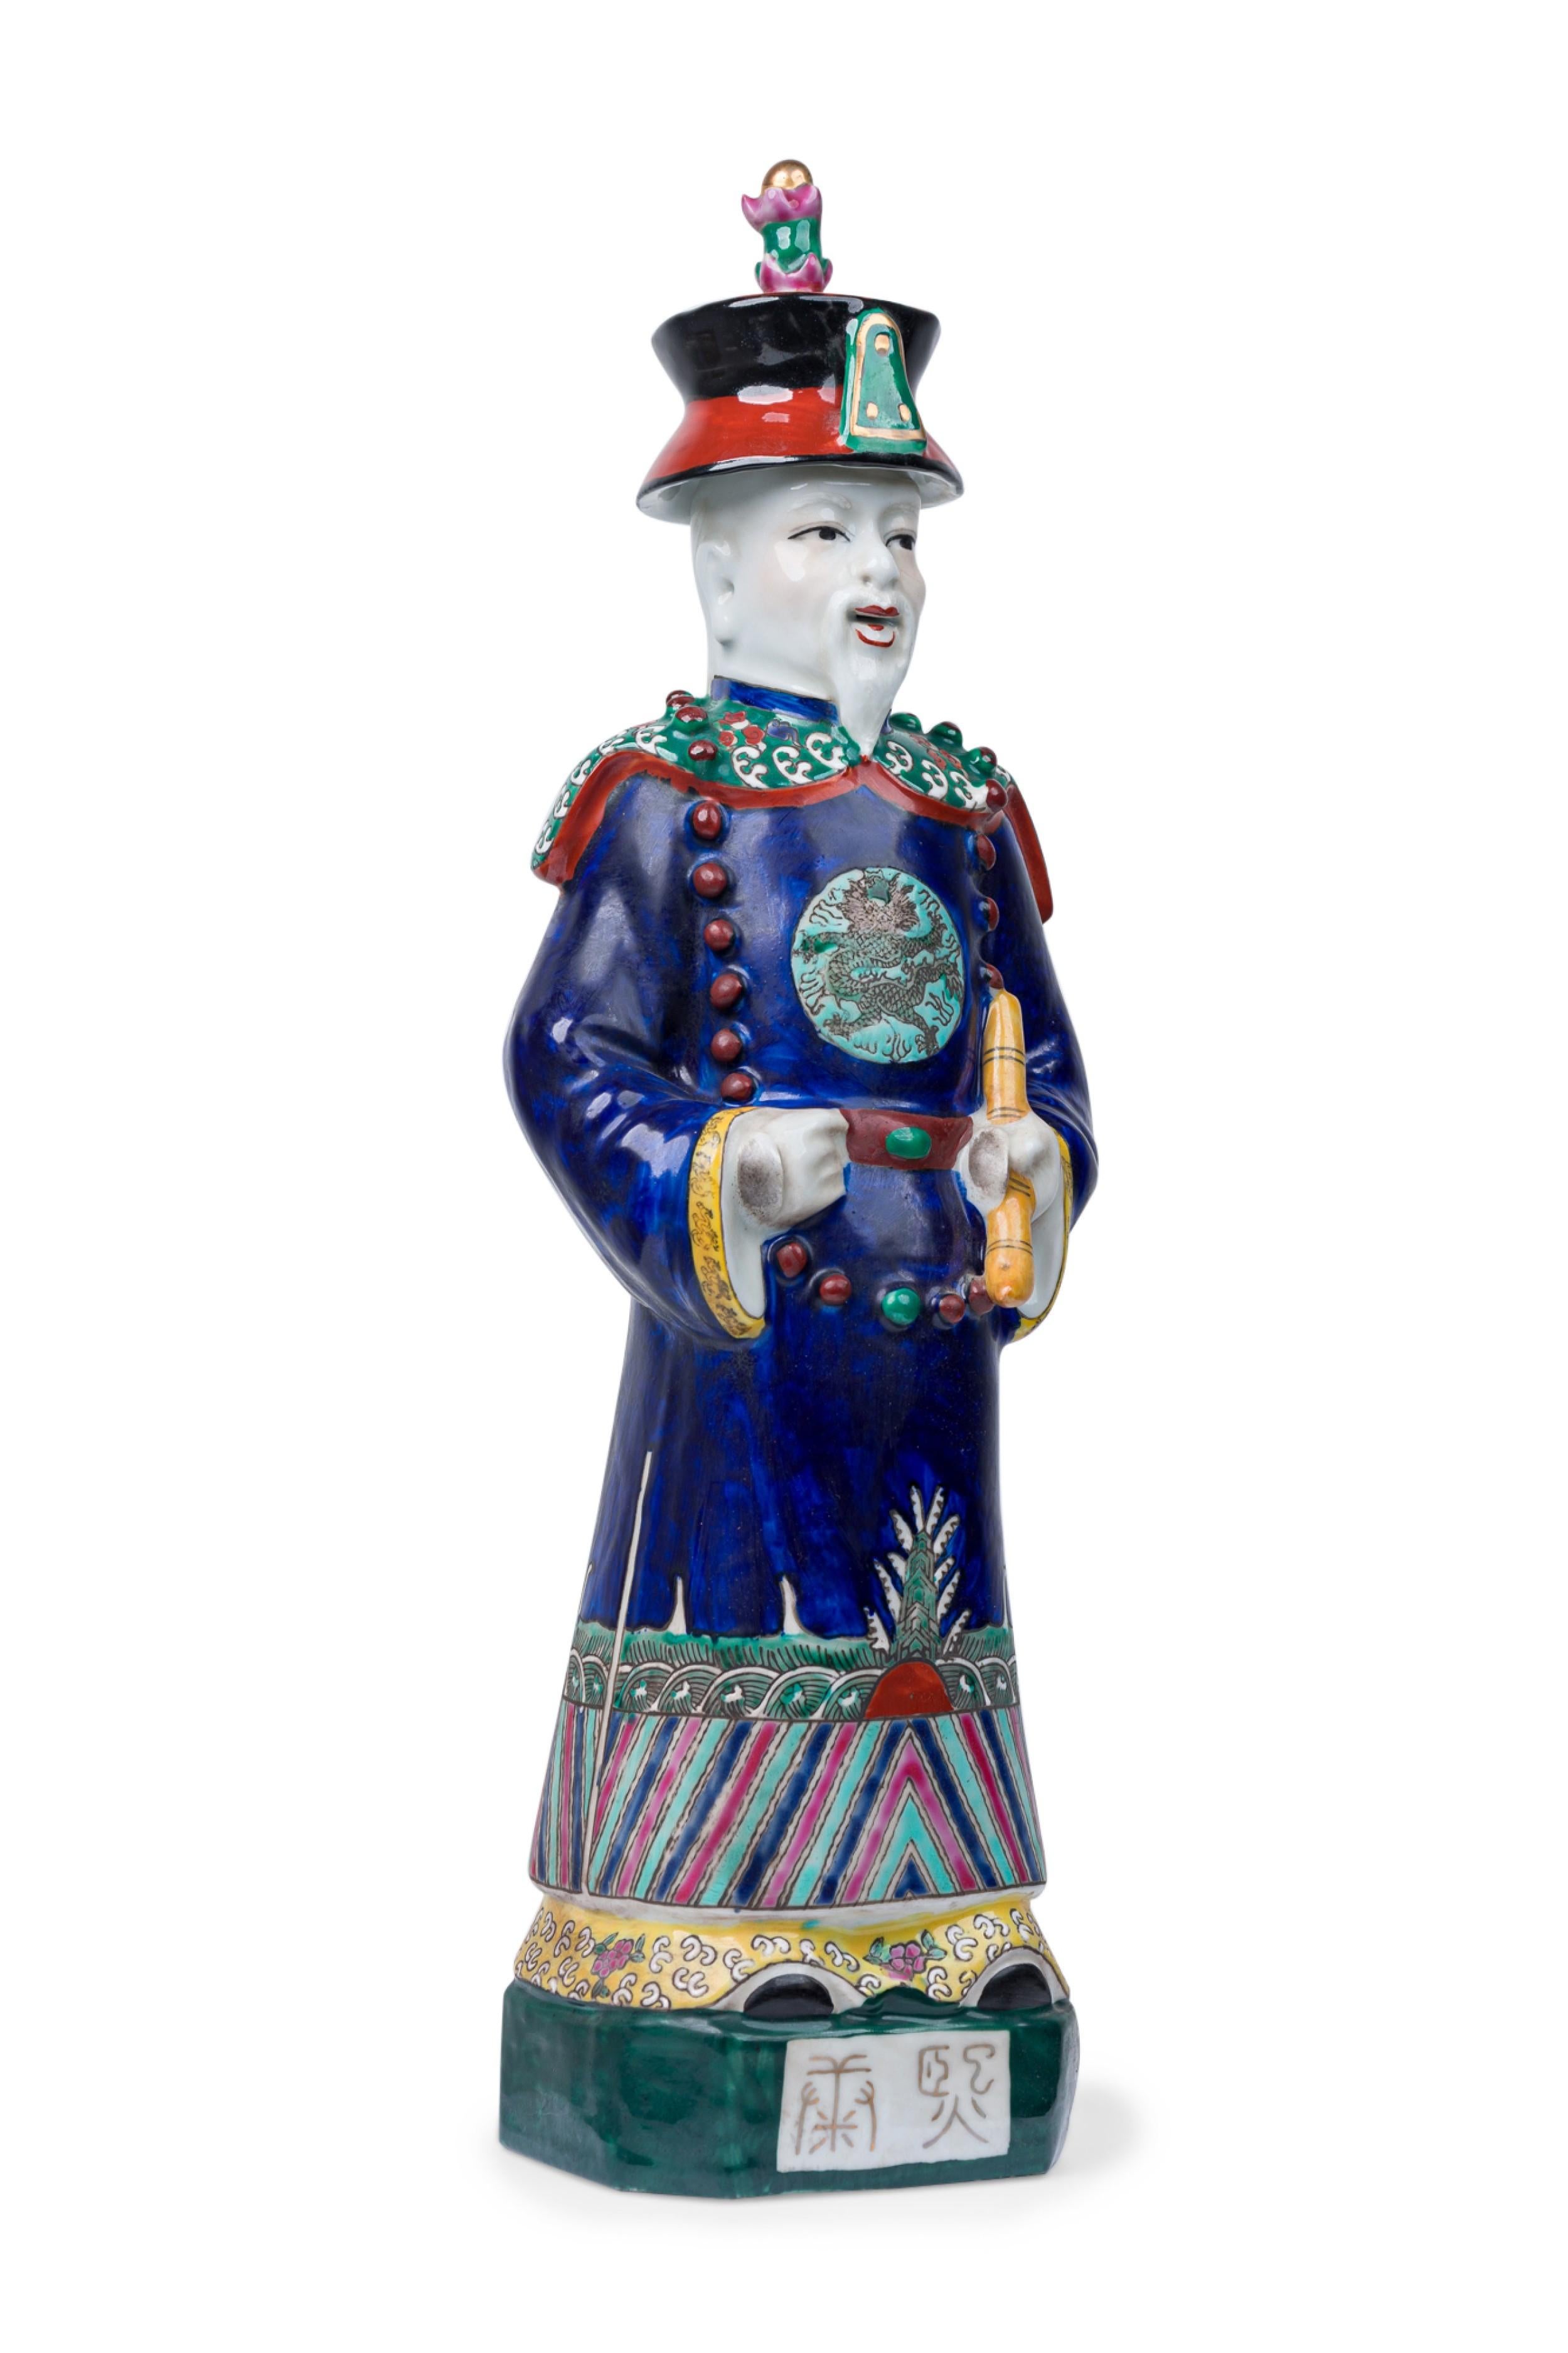 Pair of Chinese Painted Ceramic Figures Depicting a Blue Robed Emperor For Sale 10